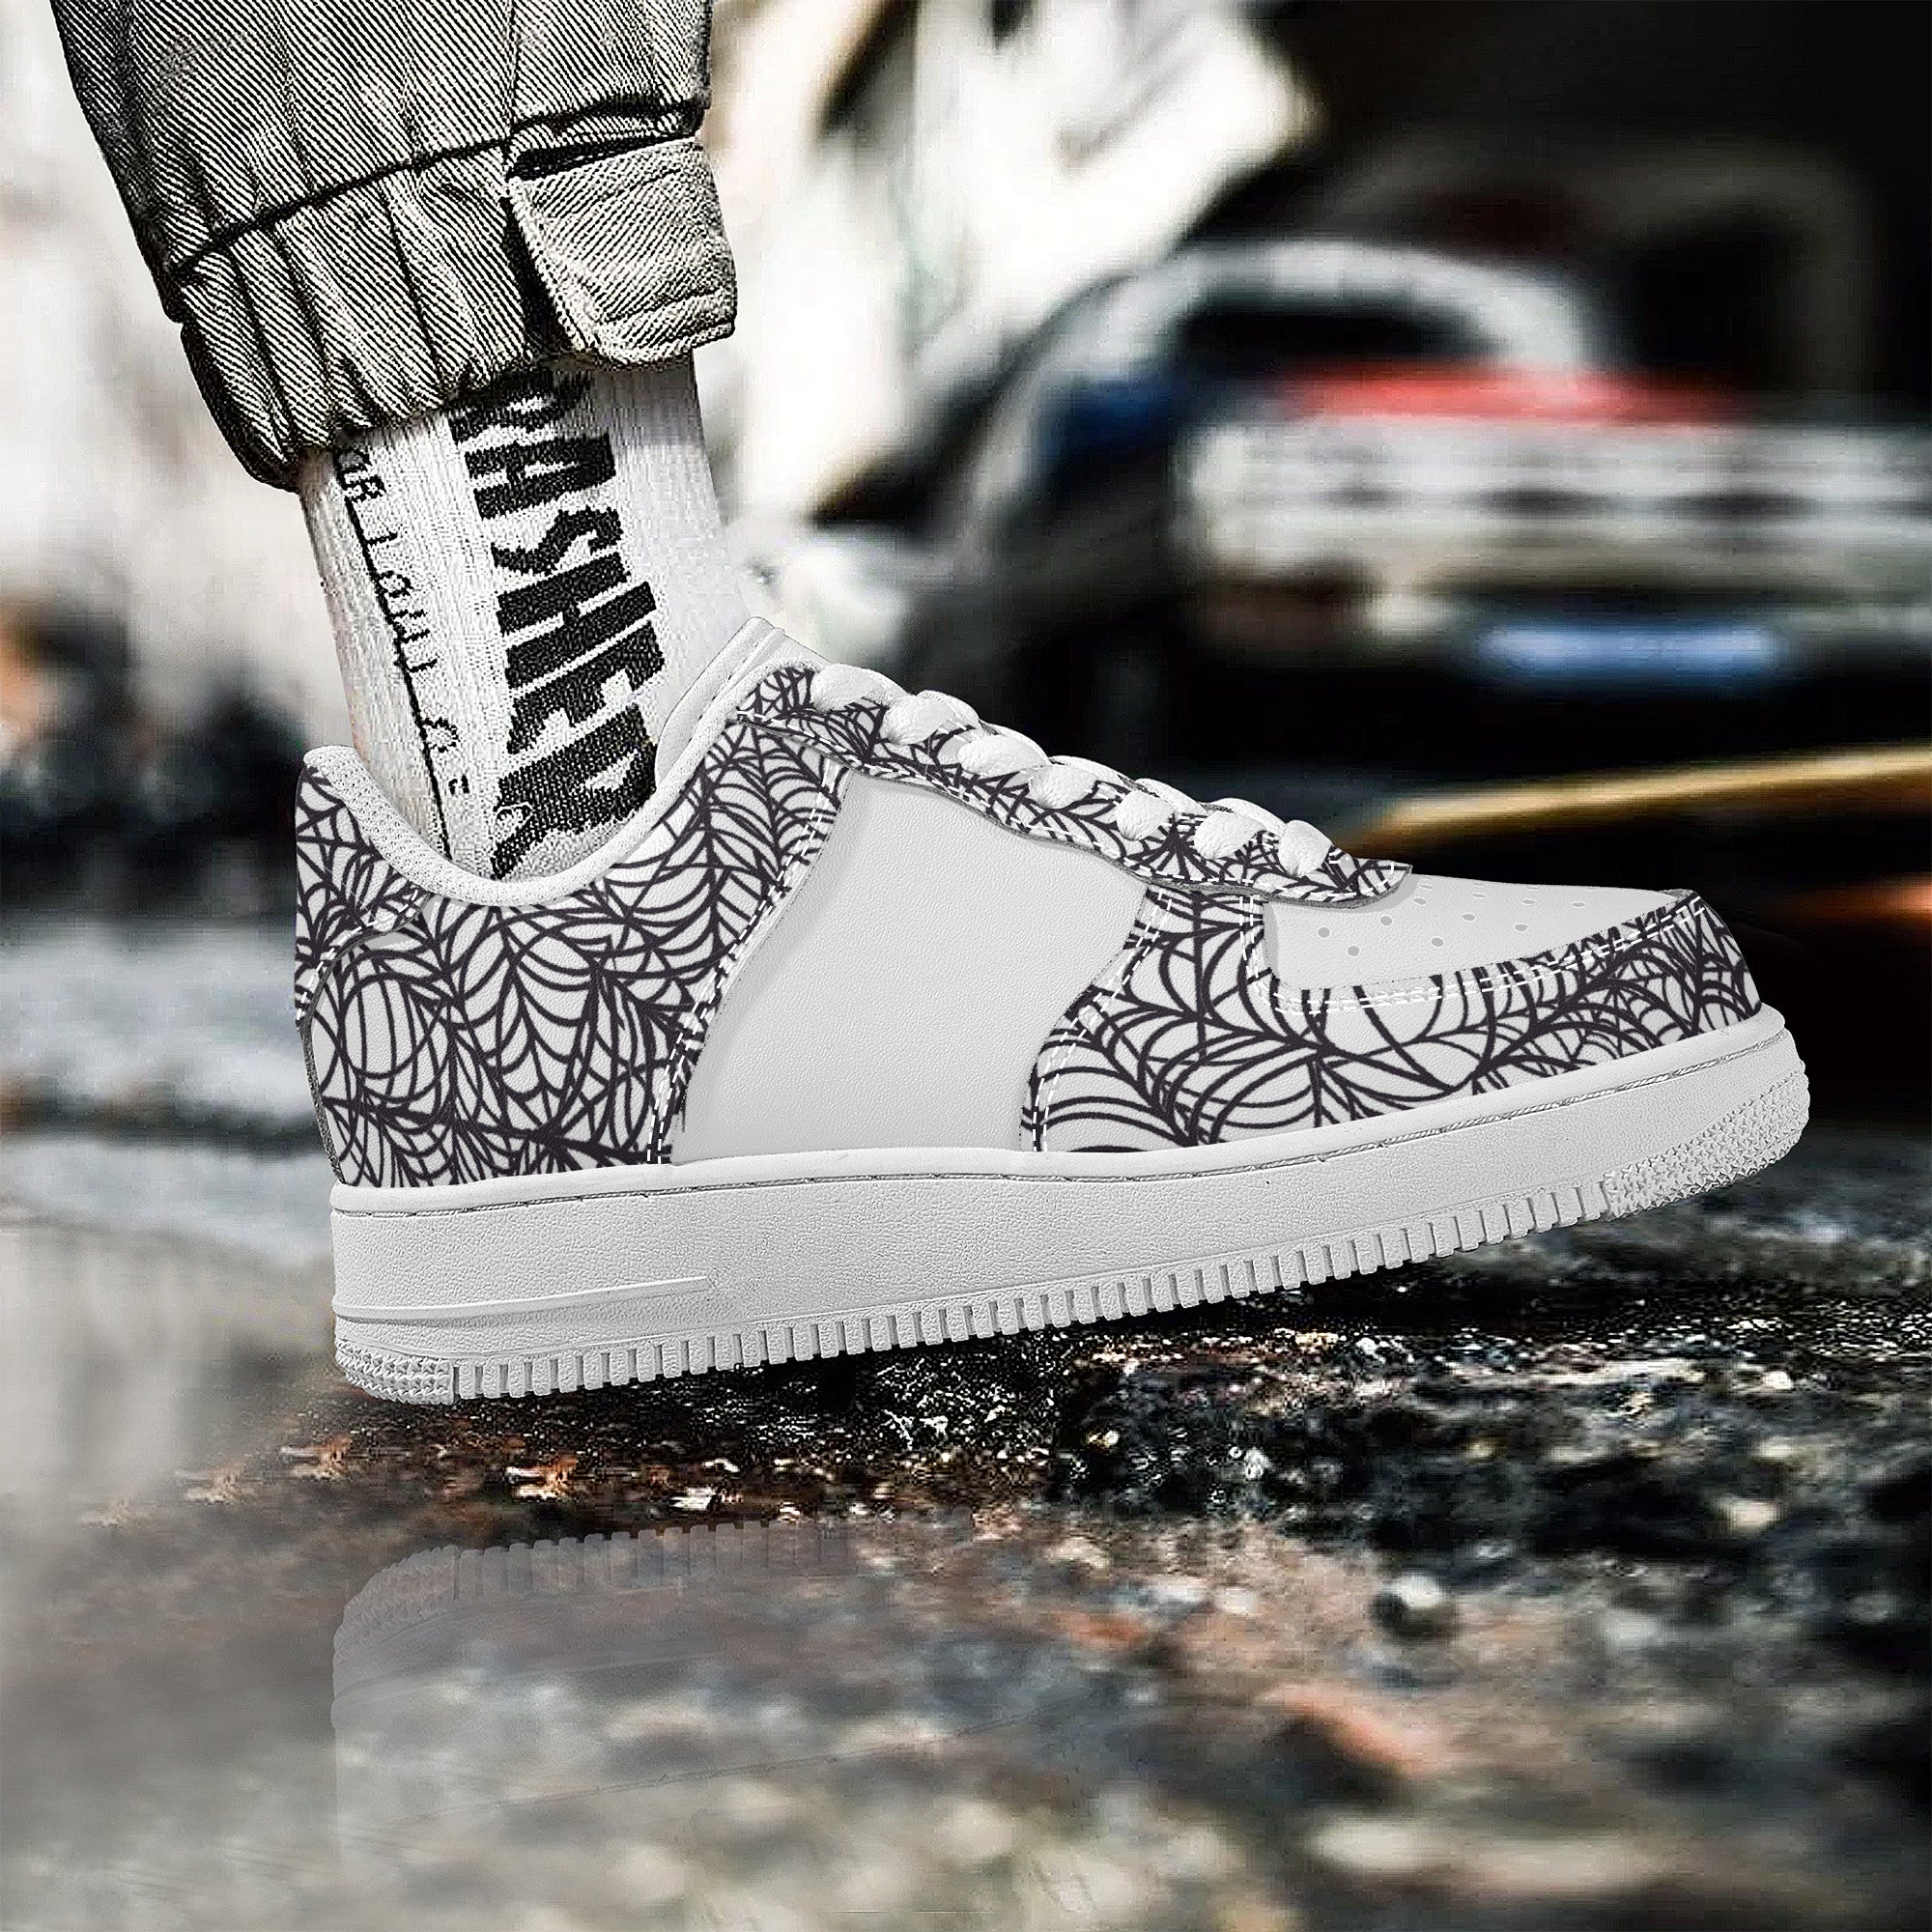 Cool shoes by Parker N | Low Top Customized | Shoe Zero